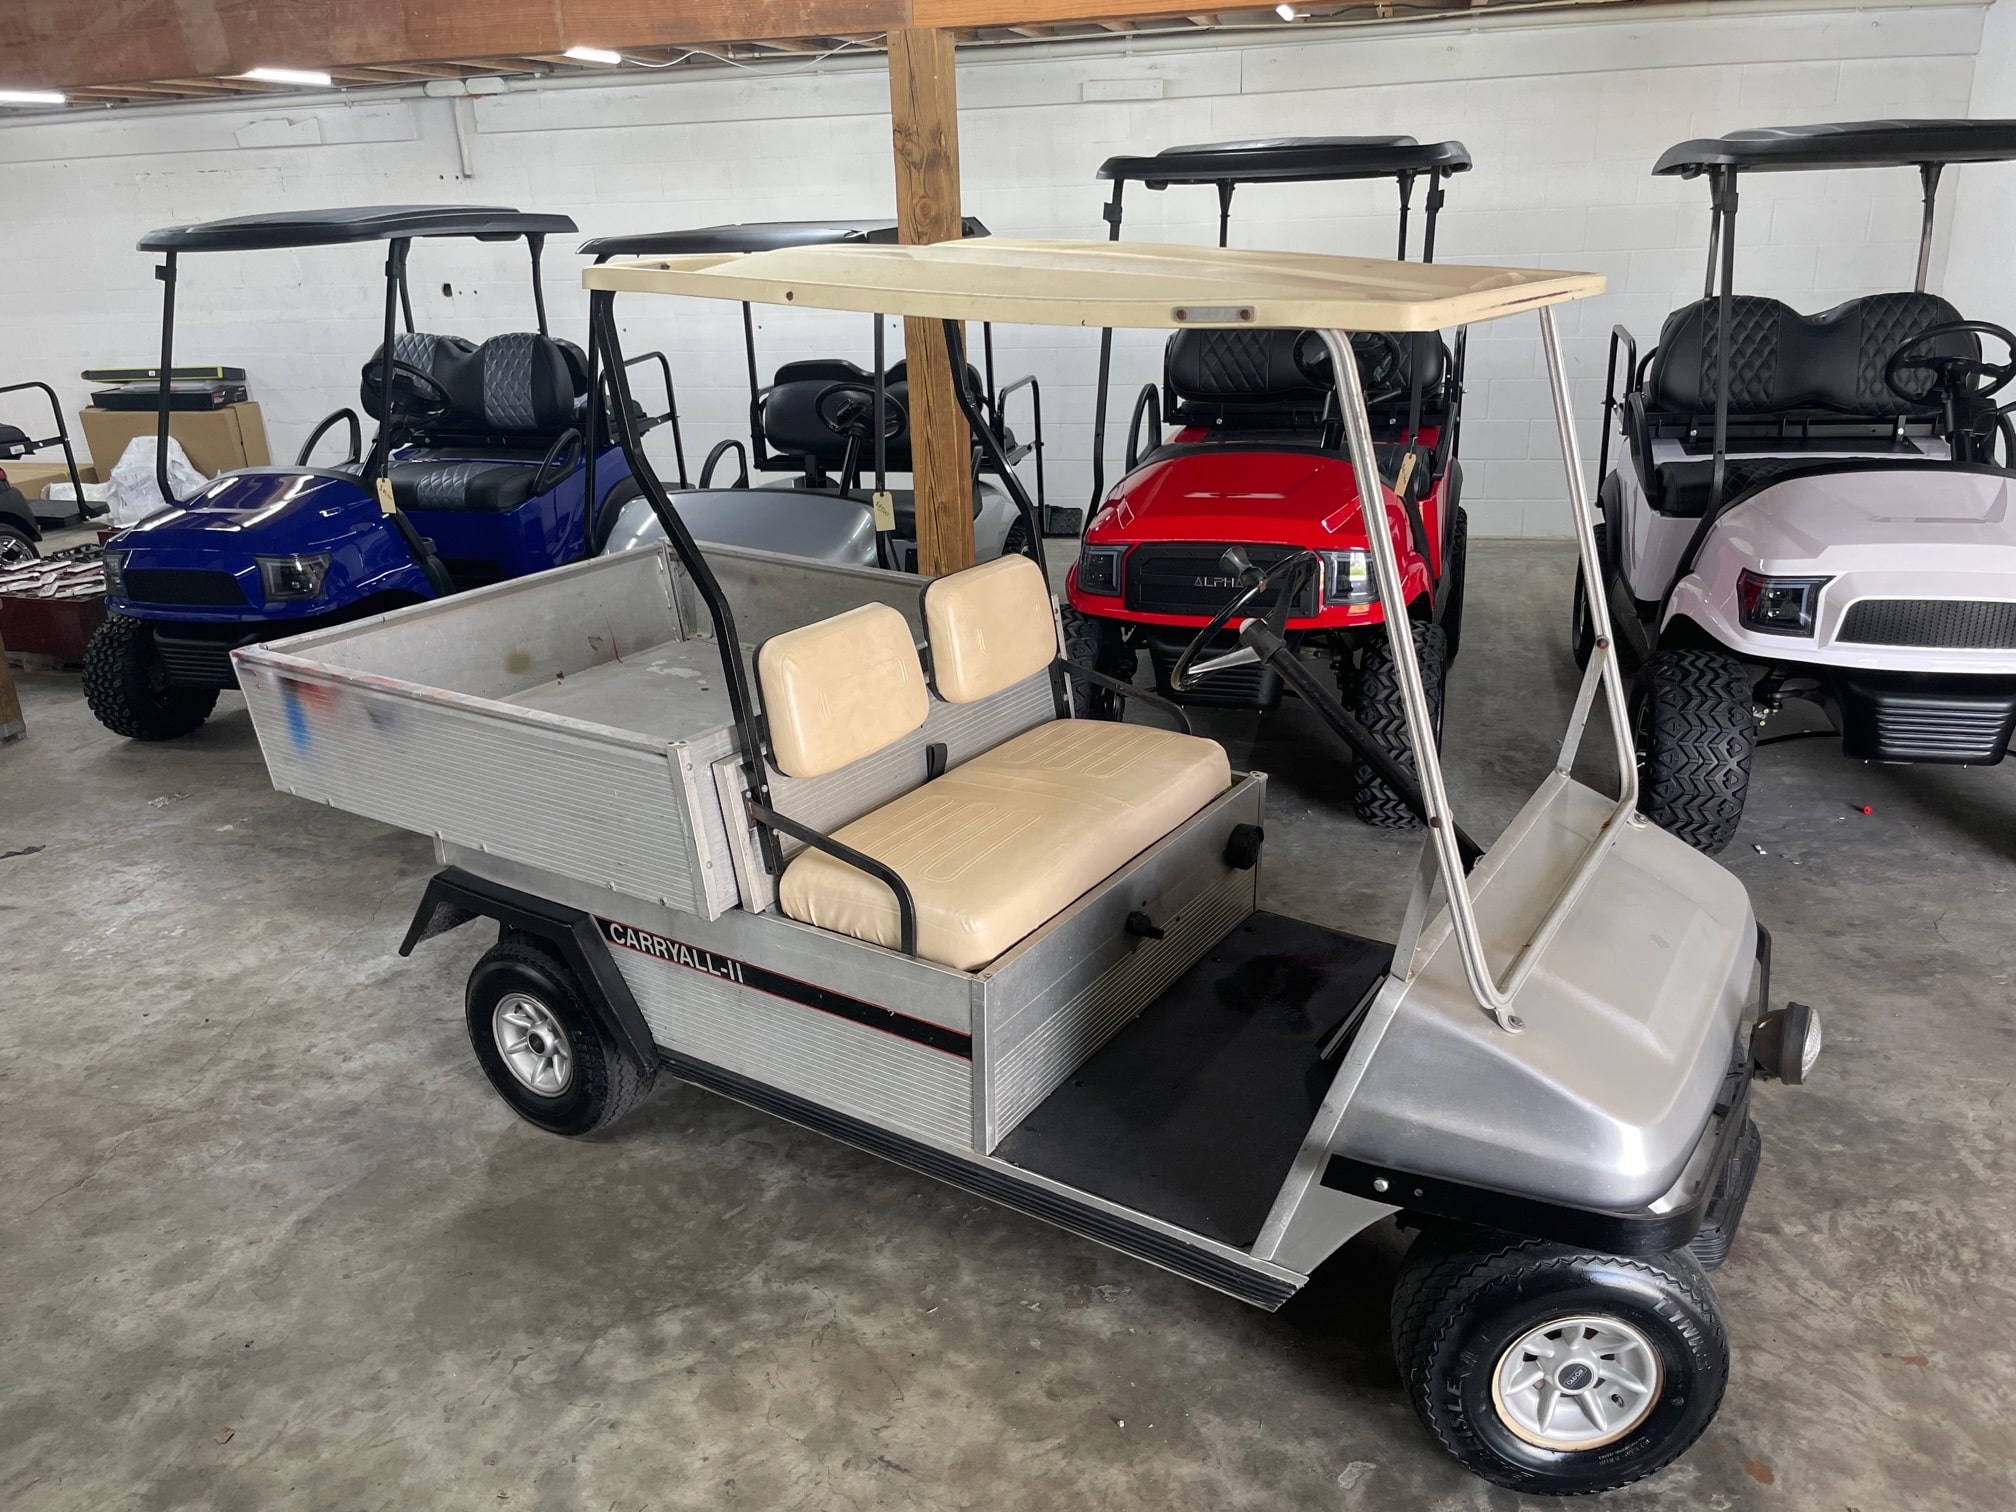 Golf Cart Salvage Parts Pros and Cons